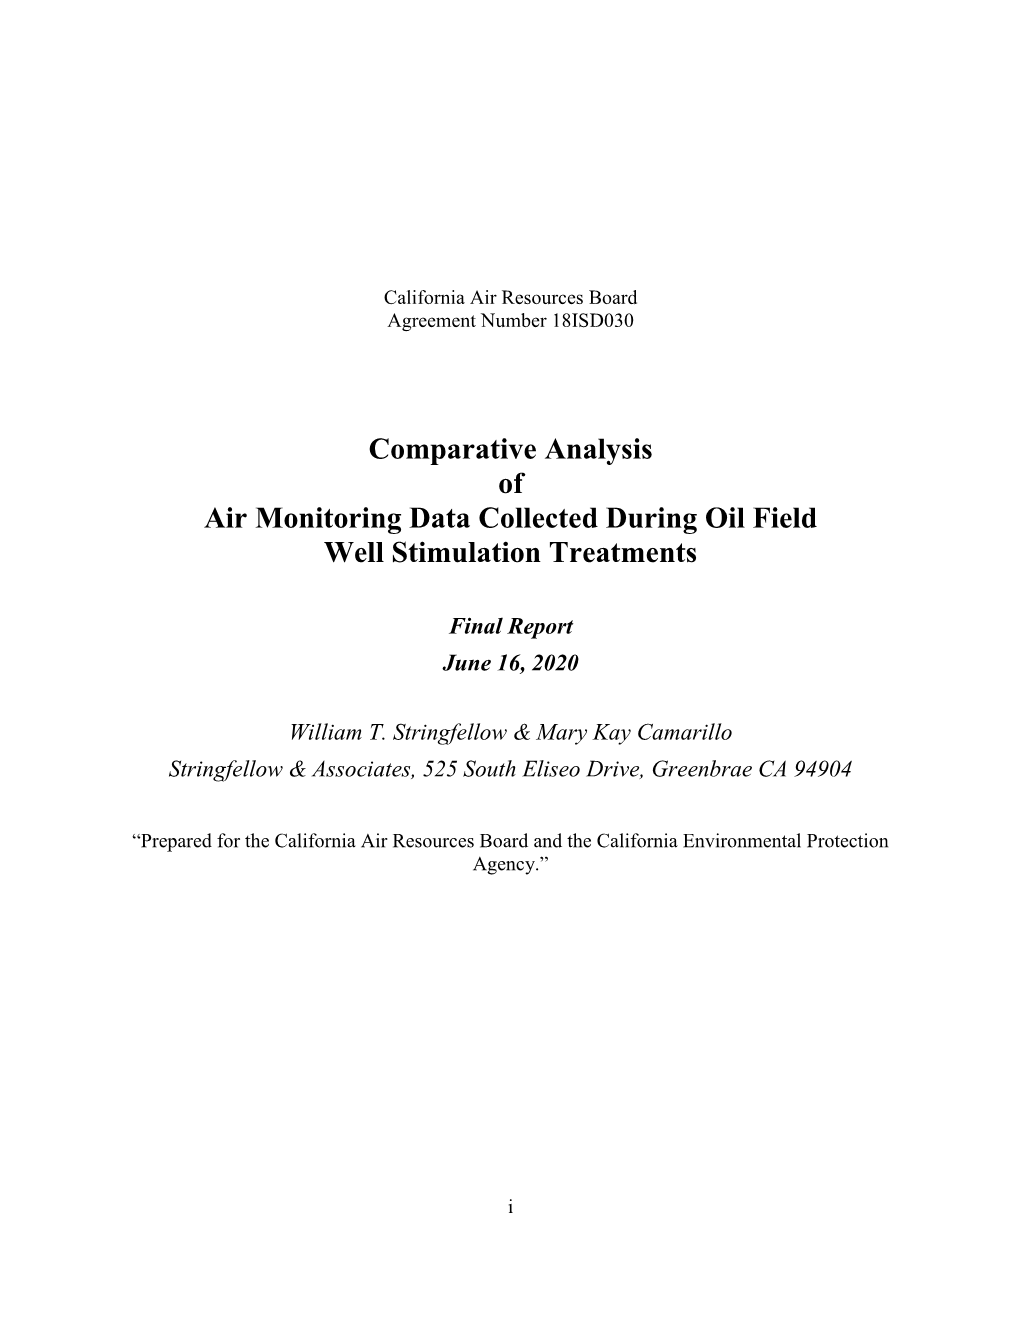 Comparative Analysis of Air Monitoring Data Collected During Oil Field Well Stimulation Treatments